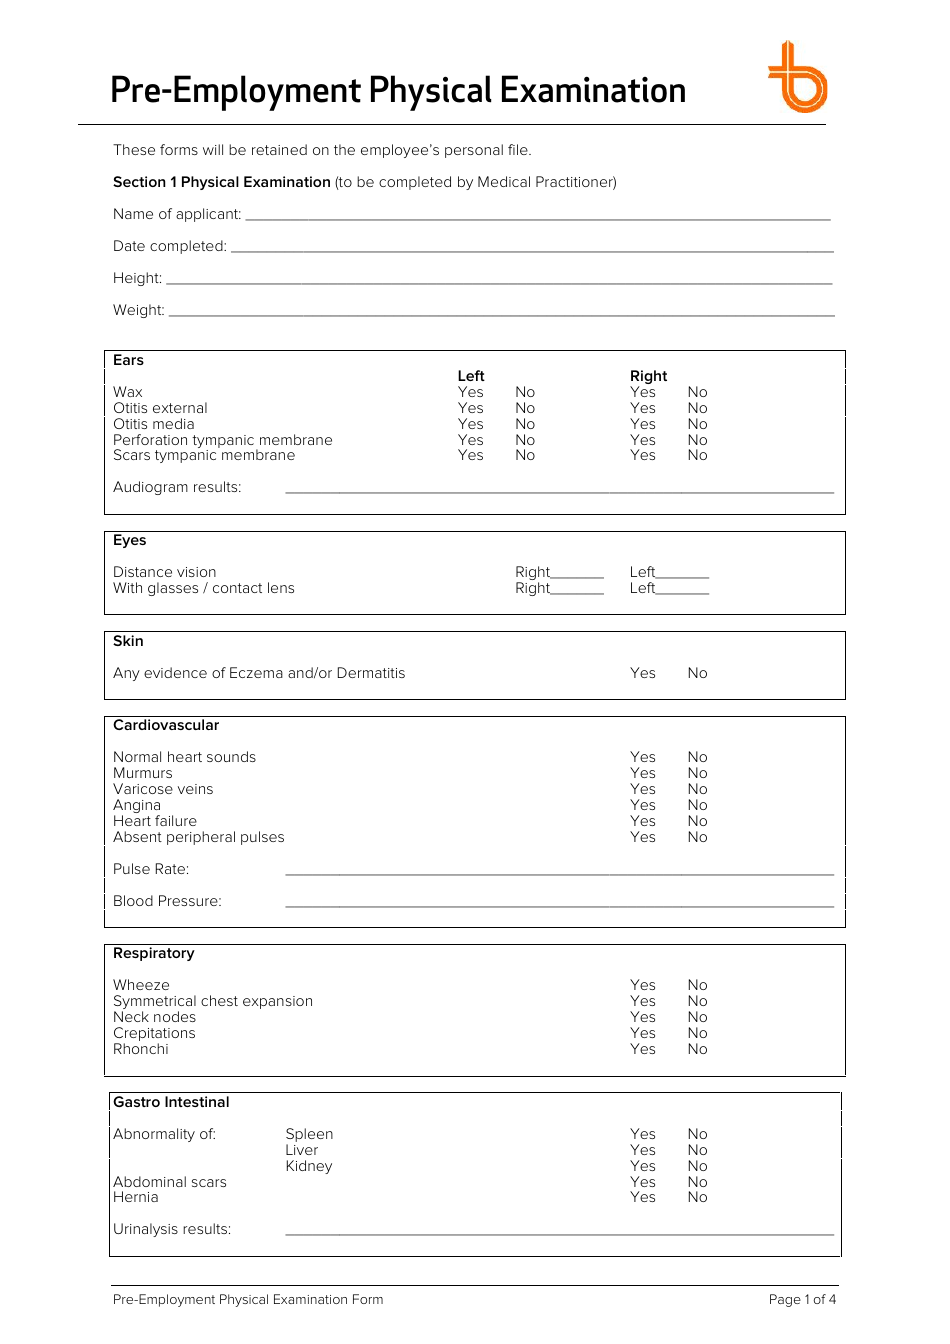 Pre-employment Physical Examination Form, Page 1